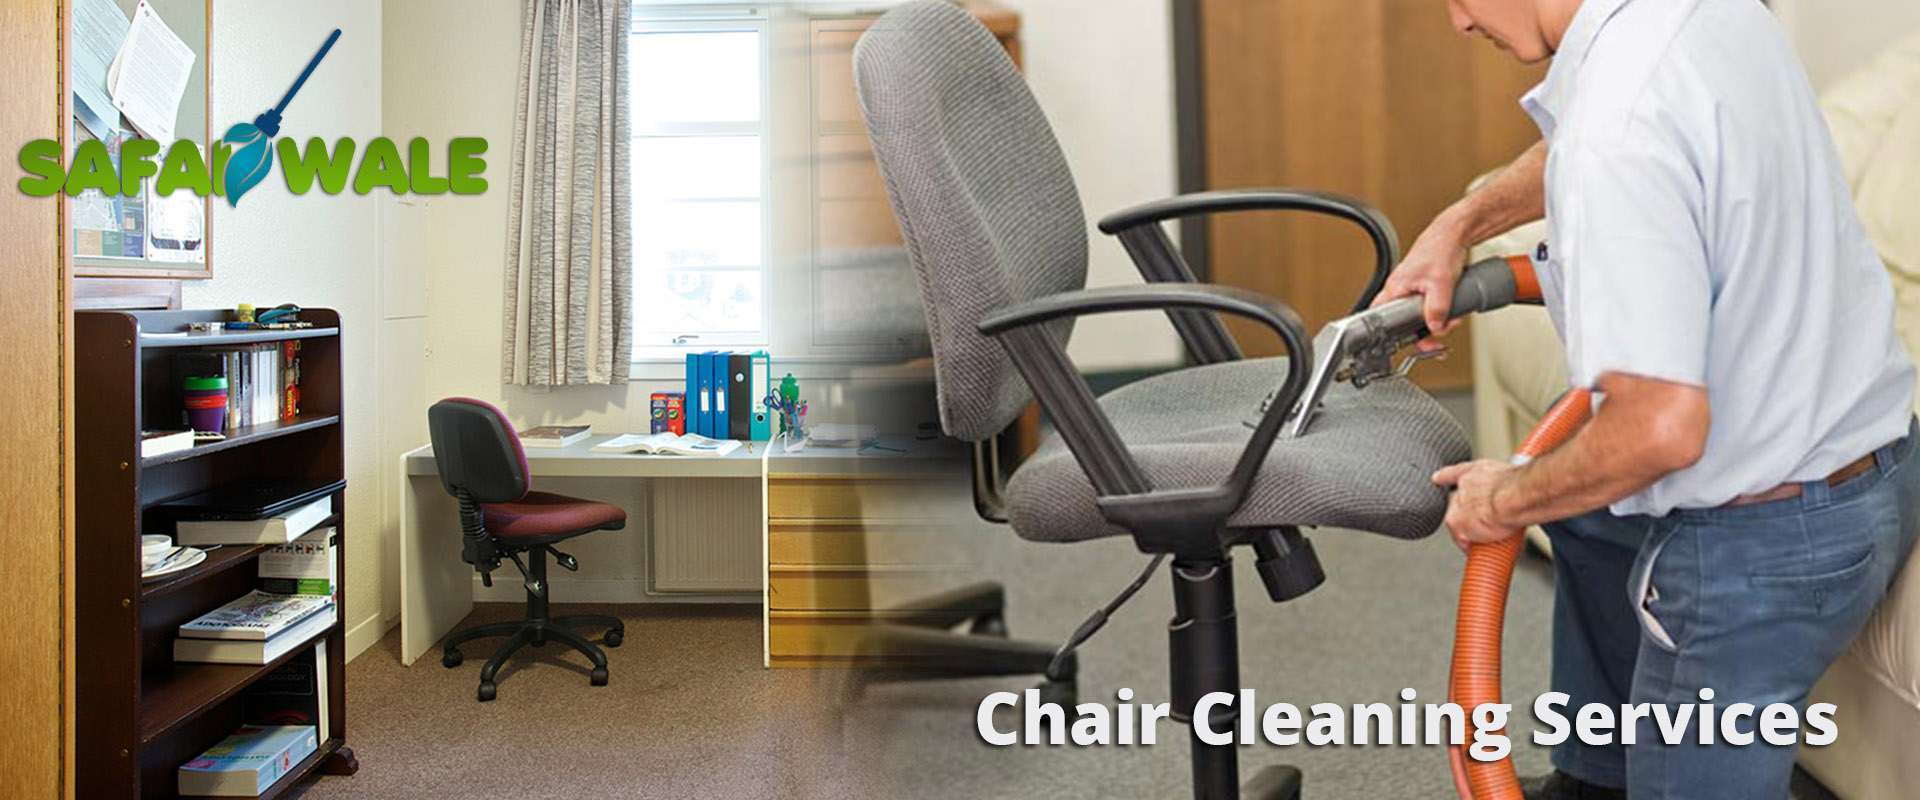 chair cleaning services in Gurgaon